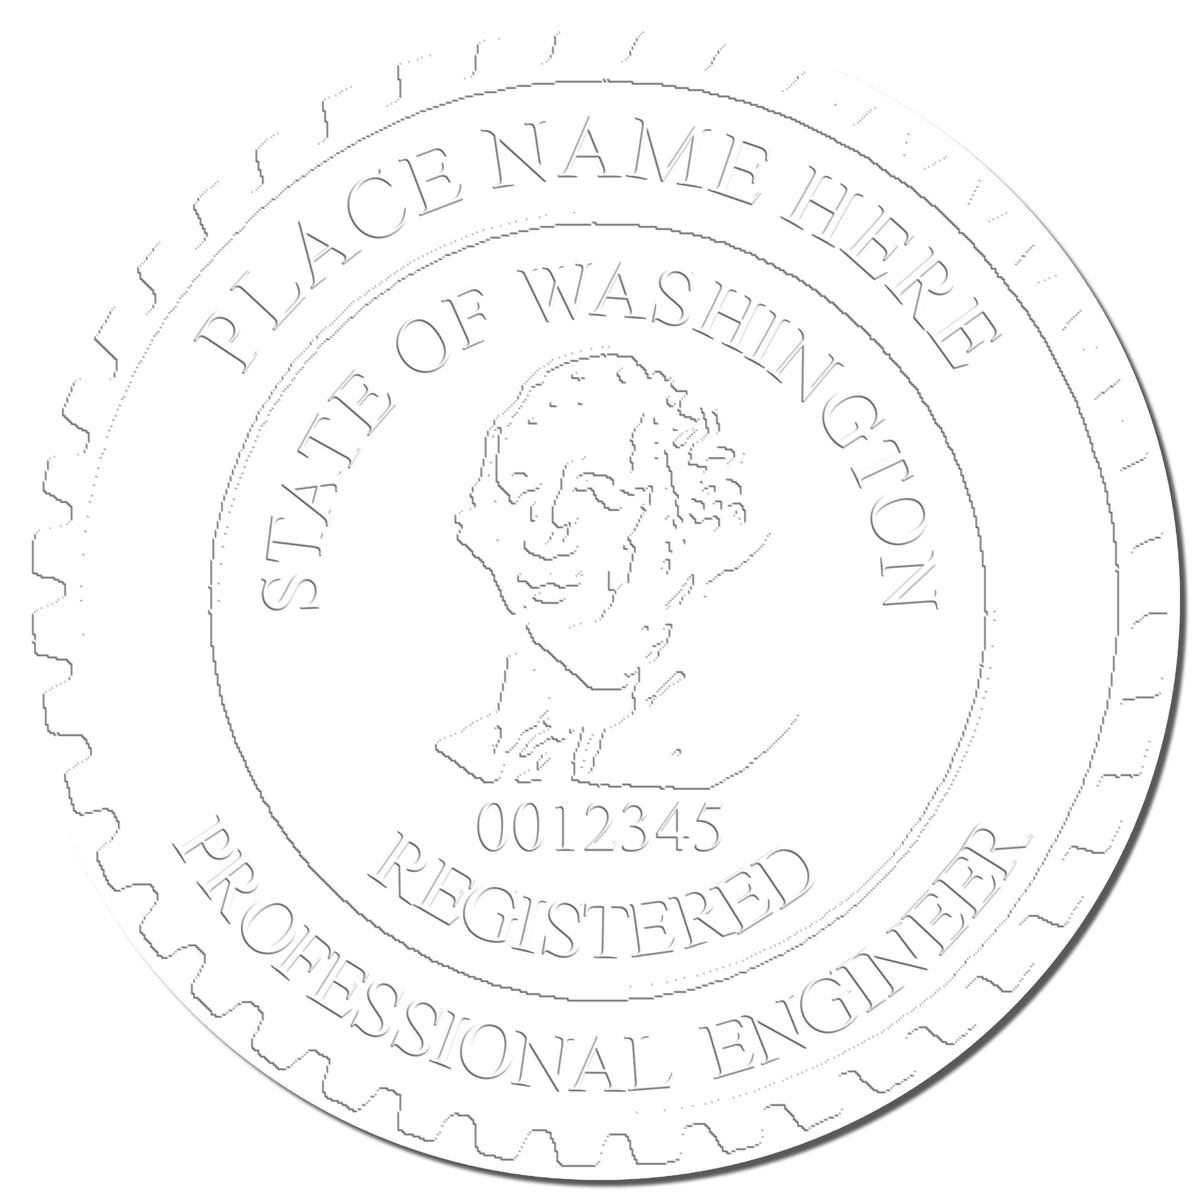 The Soft Washington Professional Engineer Seal stamp impression comes to life with a crisp, detailed photo on paper - showcasing true professional quality.